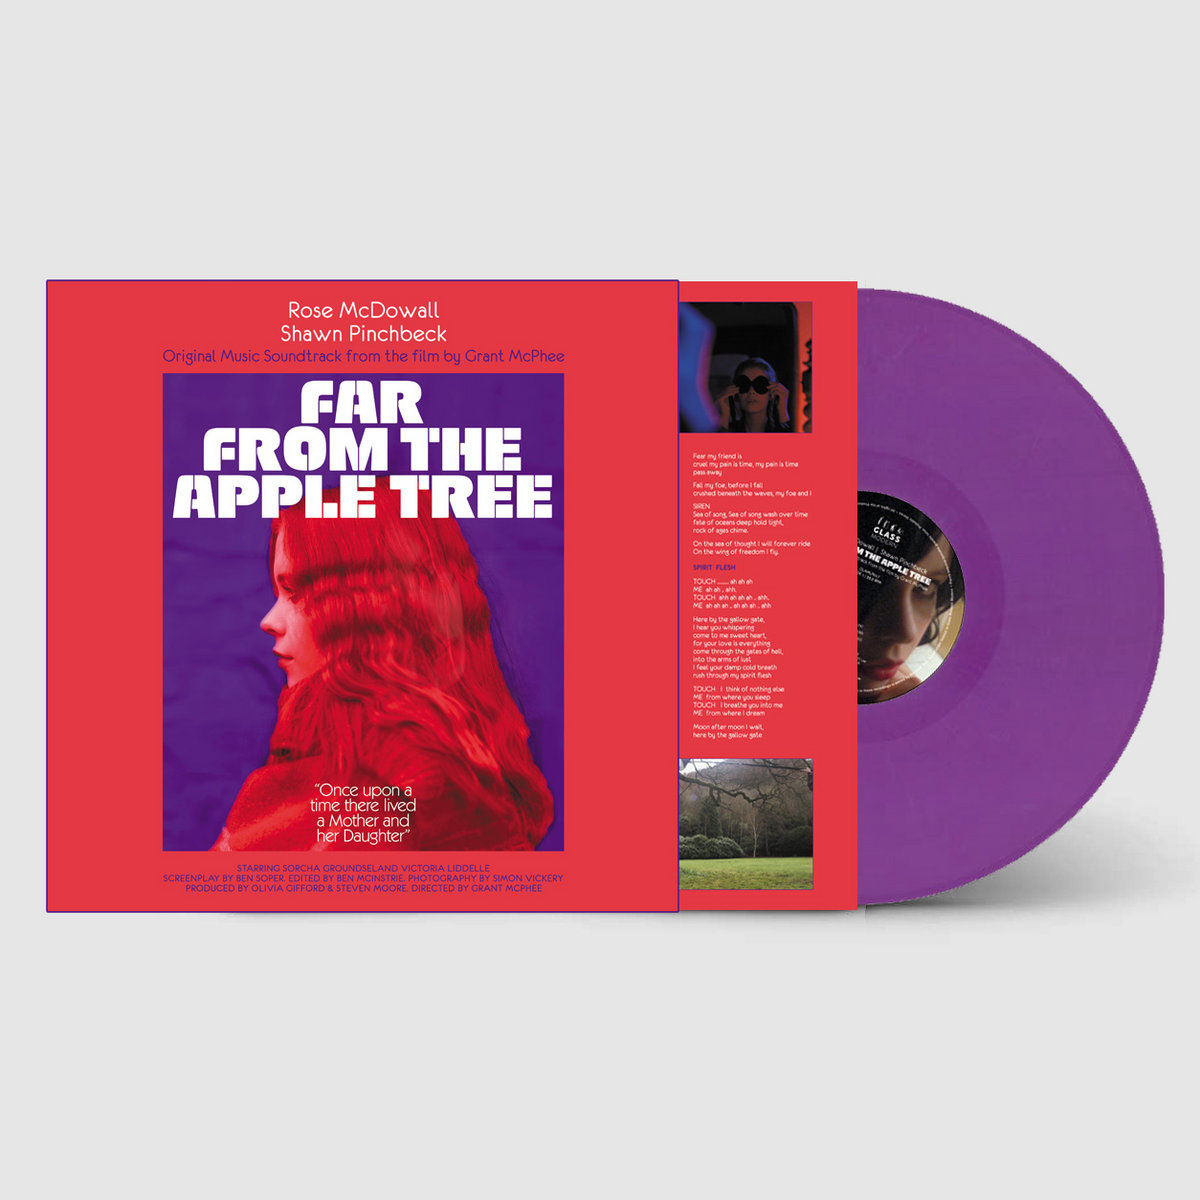 Rose Mcdowall & Shawn Pinchbeck - Far From The Apple Tree (Original Music Soundtrack): Limited Purple Vinyl LP